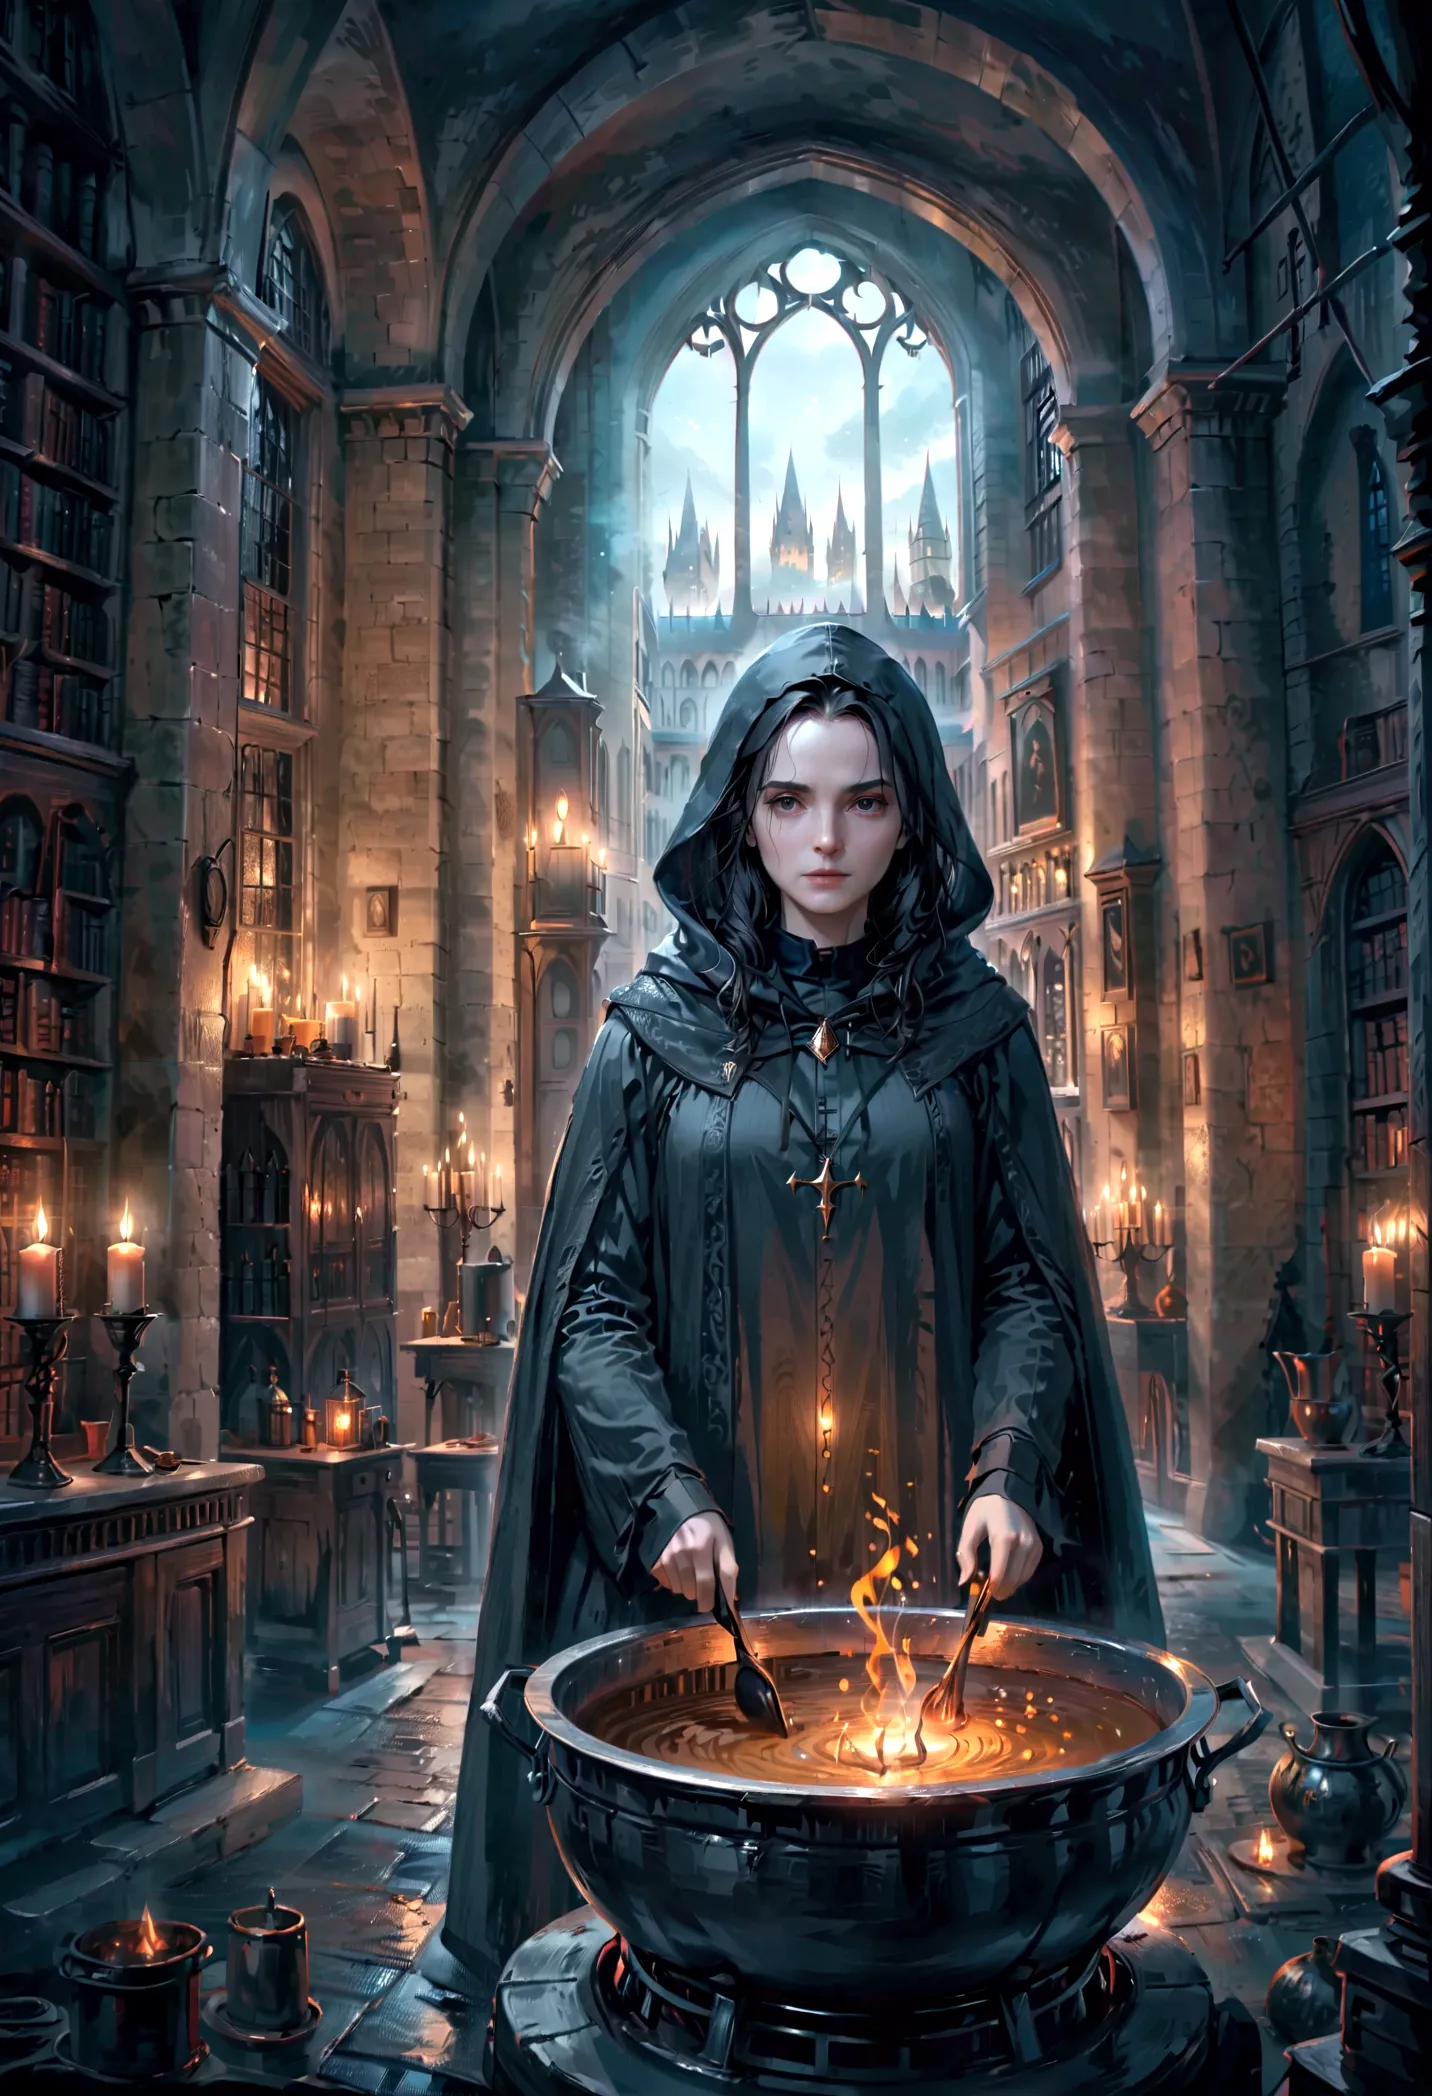 a wizard in a dark gothic castle, hooded cloak, dark magic, spellbook, cauldron, potion brewing, moody lighting, harry potter, s...